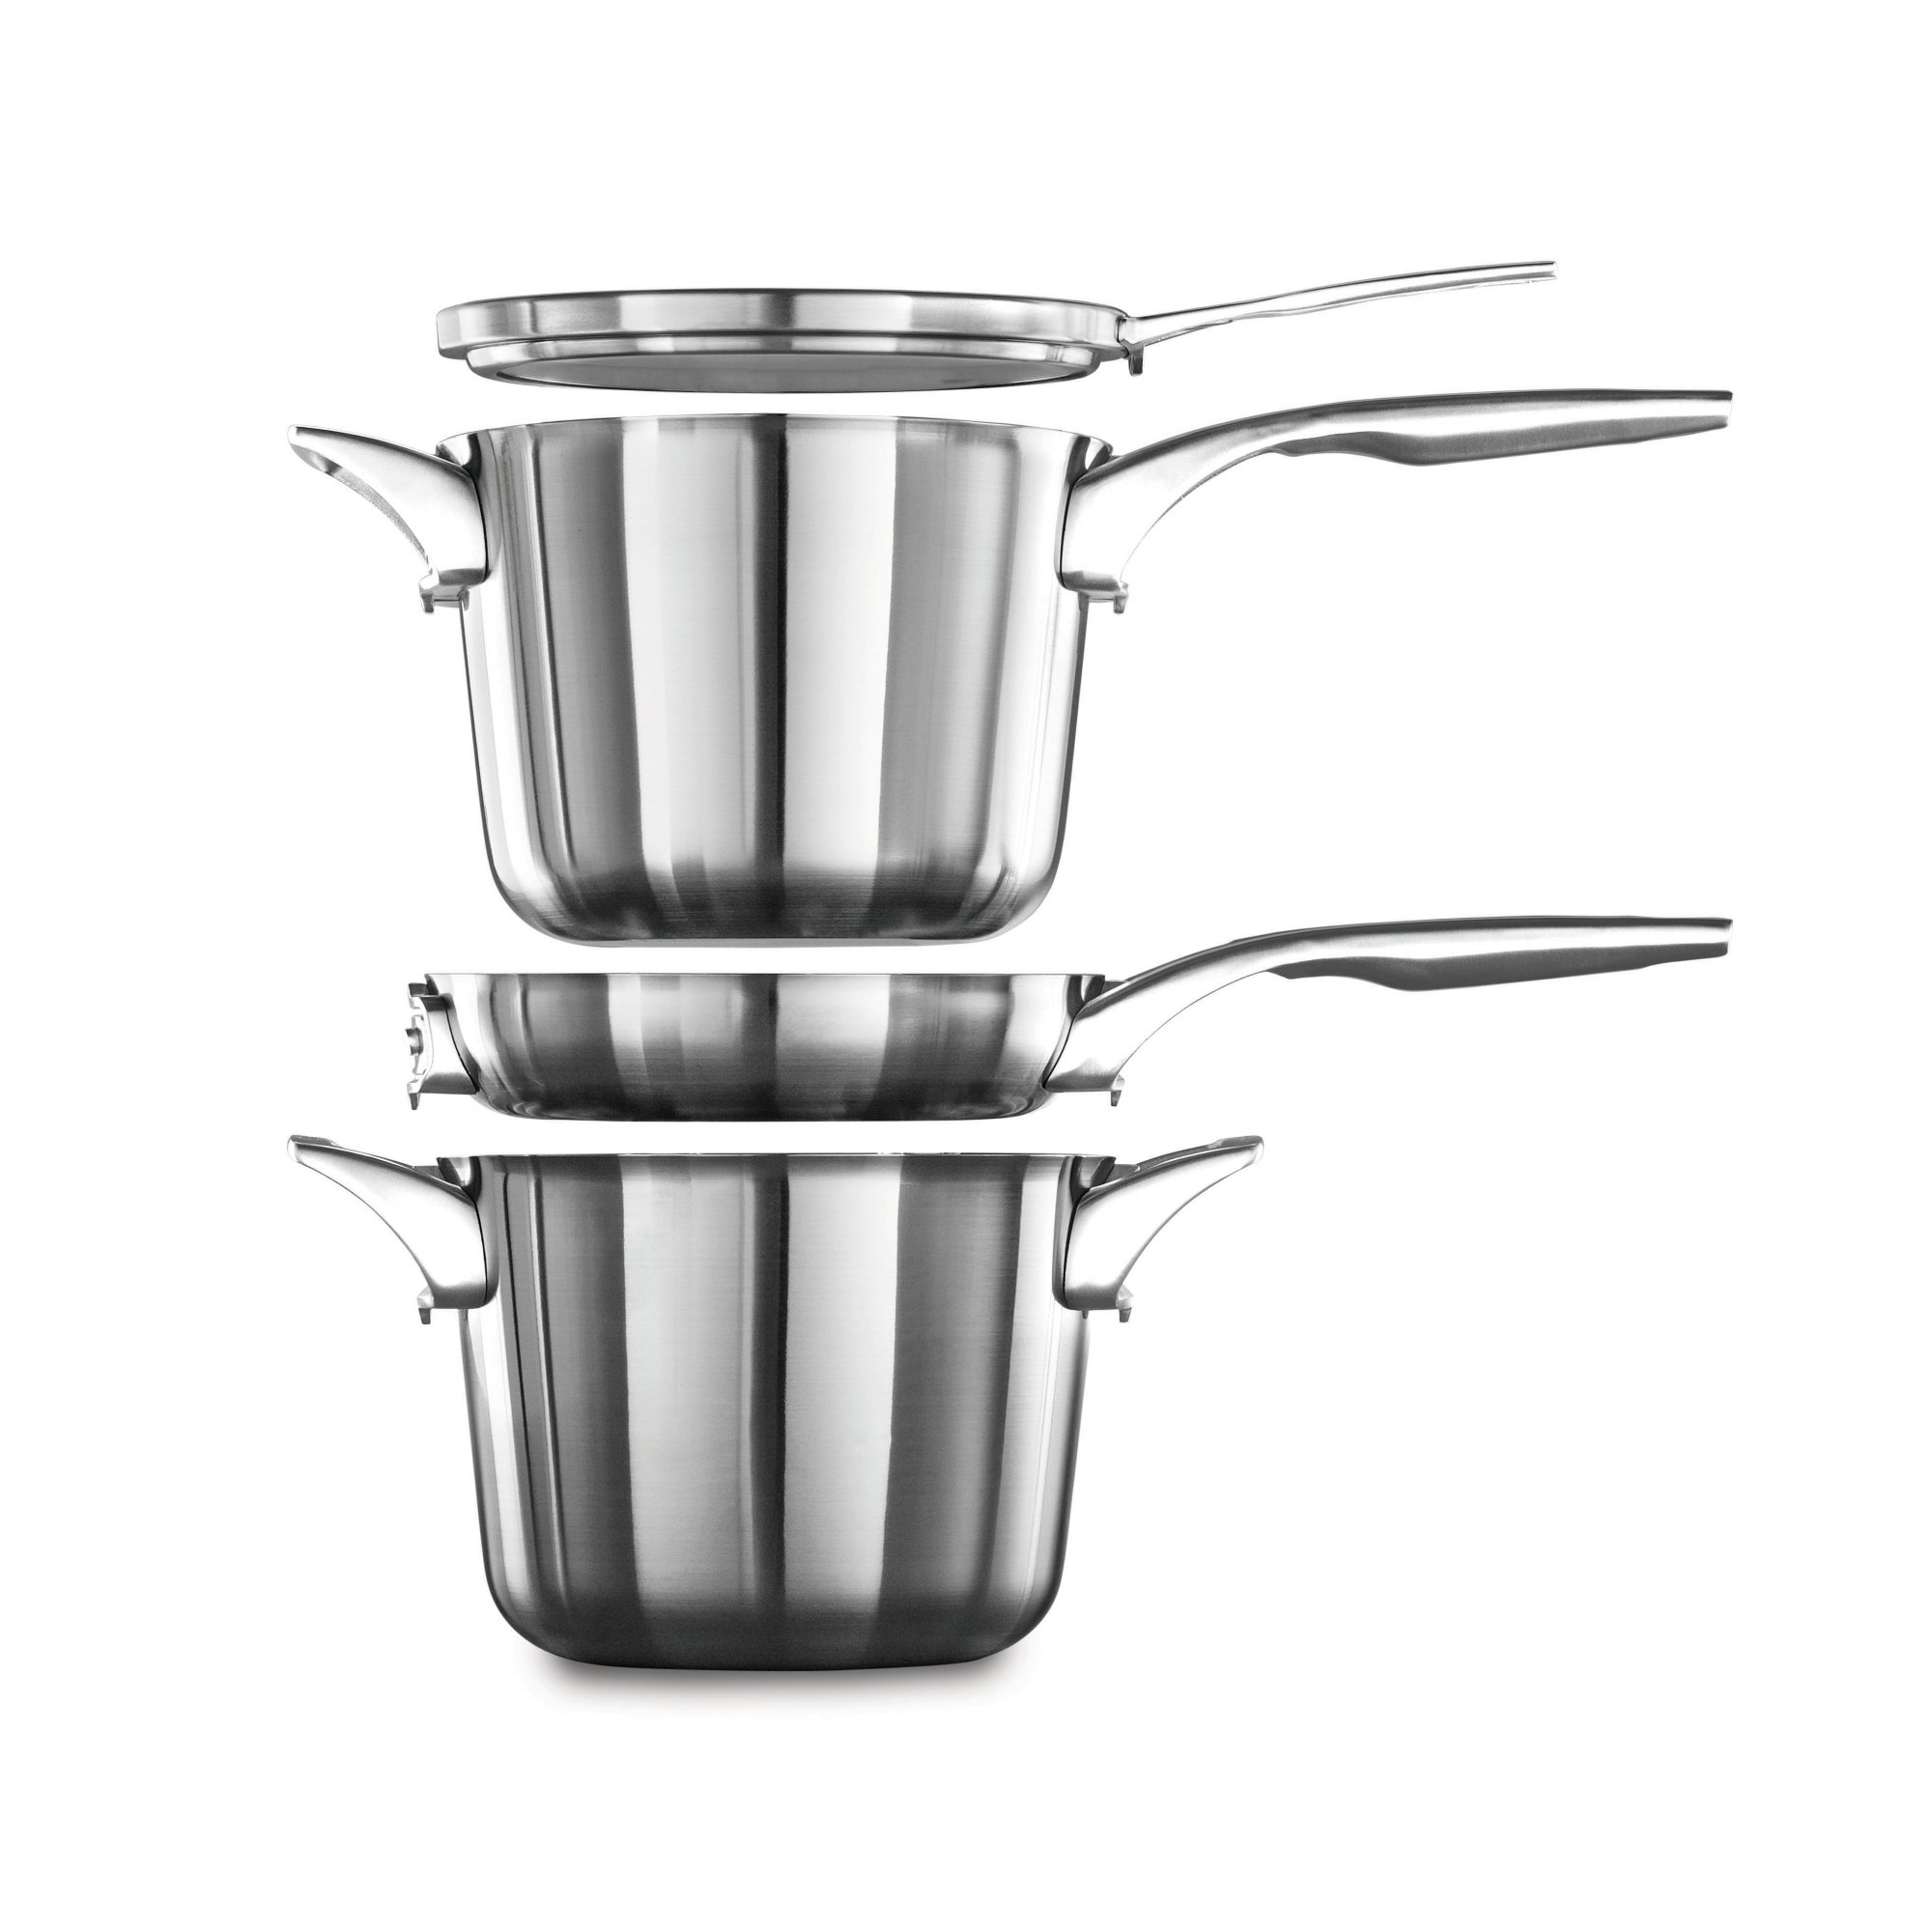 https://images.calphalon.com/is/image//Calphalon/2010655-calphalon-cookware-premier-space-saving-stainless-steel-4.5qt-sauce-pan-with-cover-exploded?